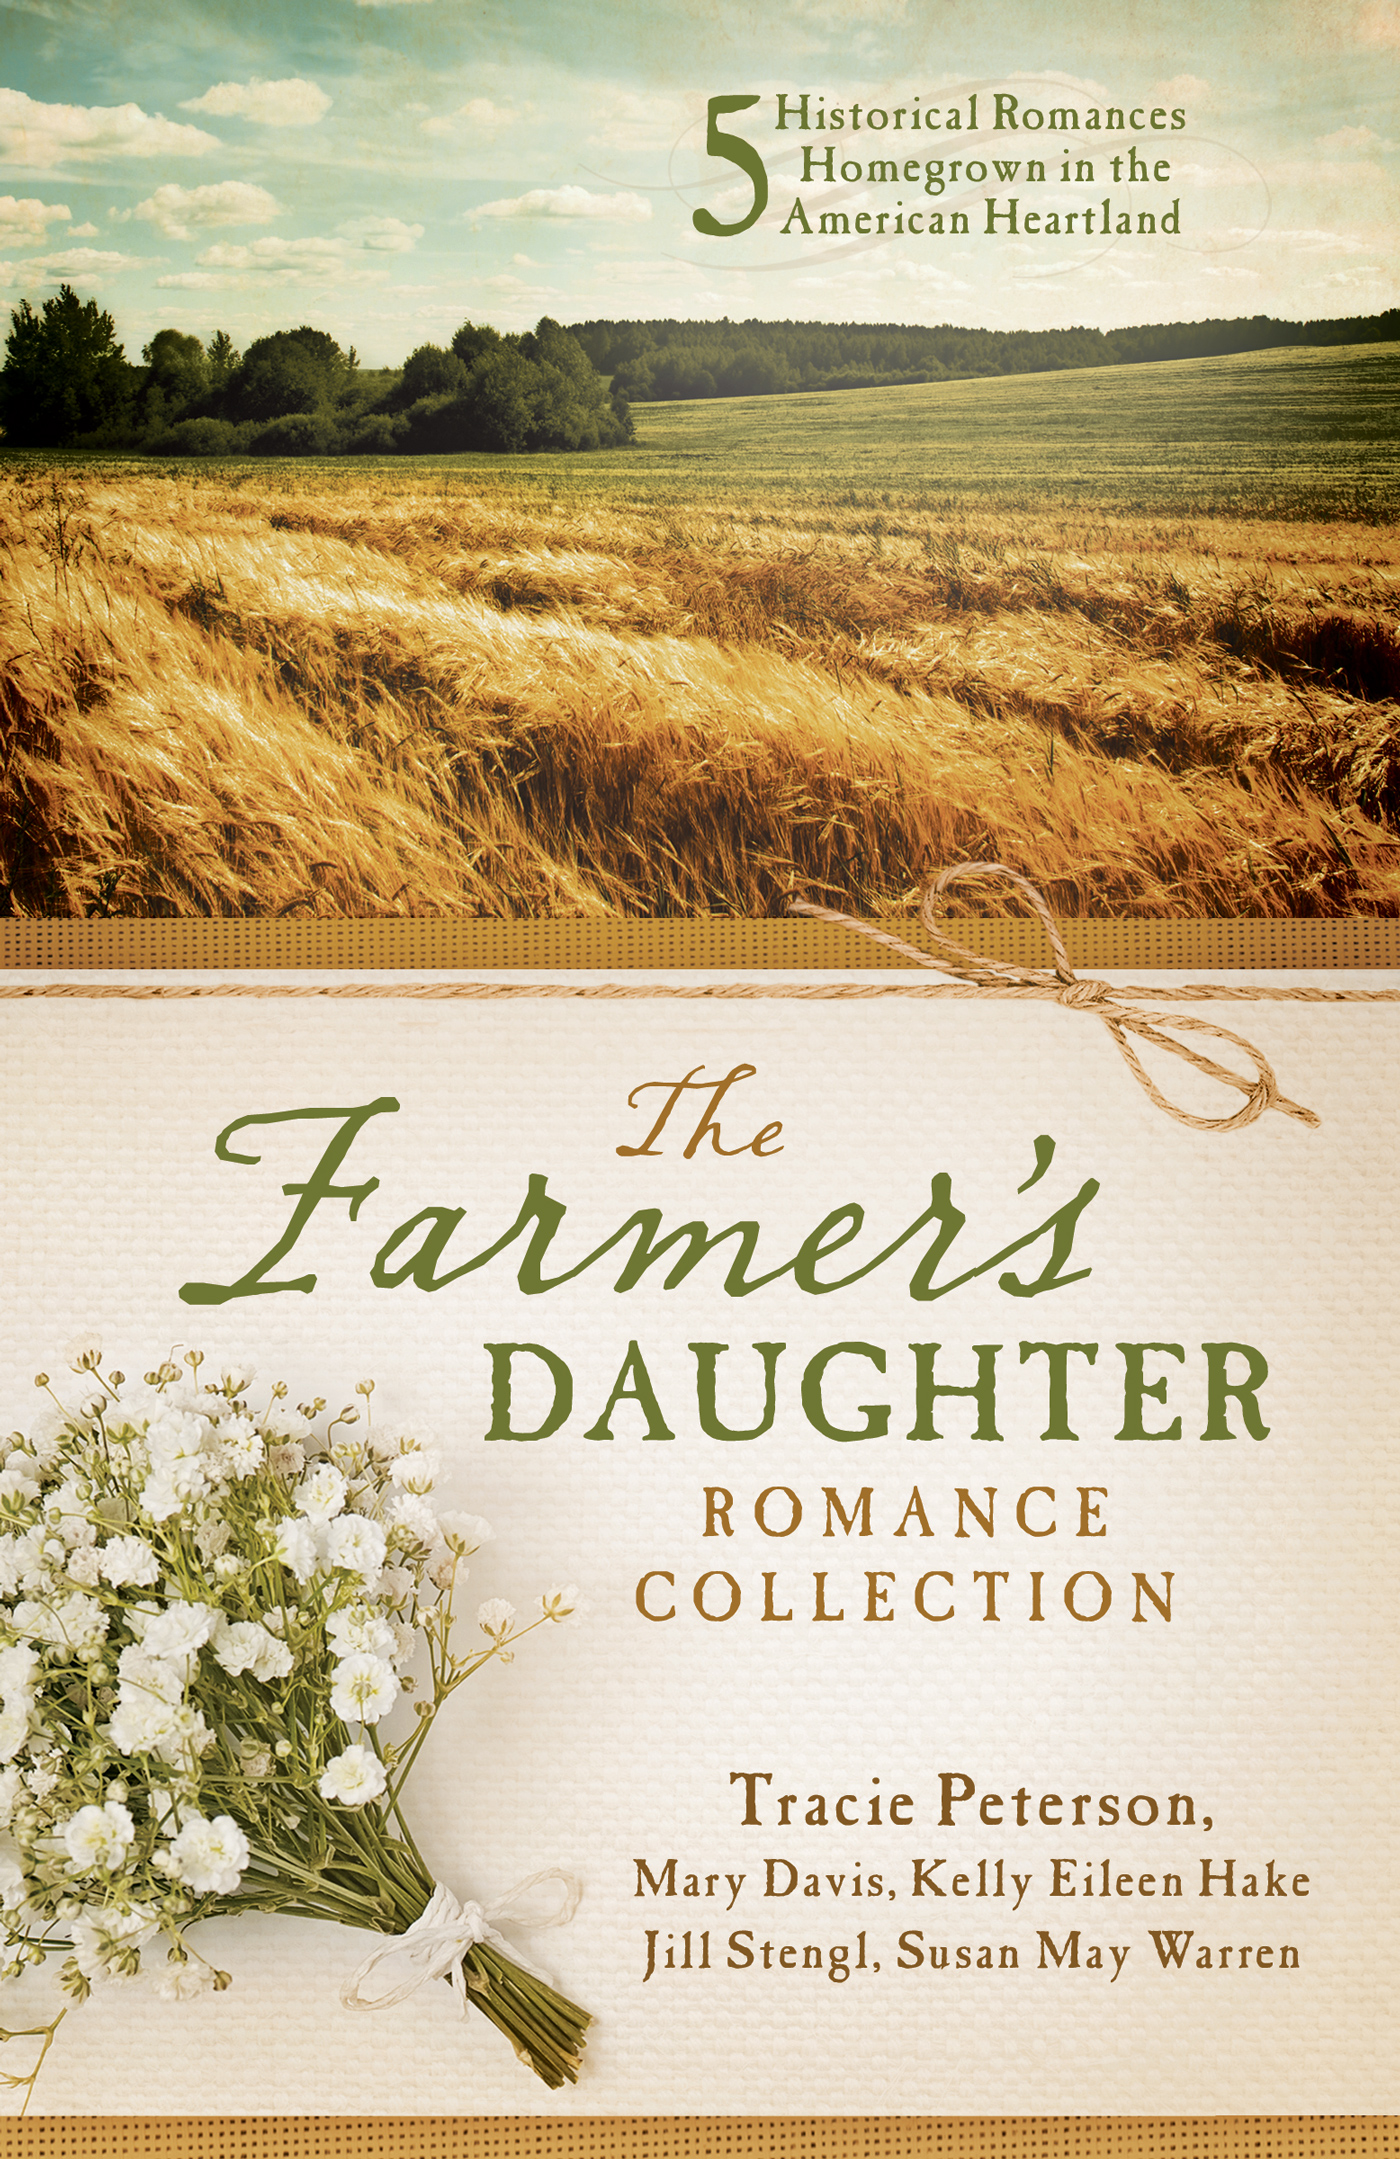 Cover image for The Farmer's Daughter Romance Collection [electronic resource] : Five Historical Romances Homegrown in the American Heartland